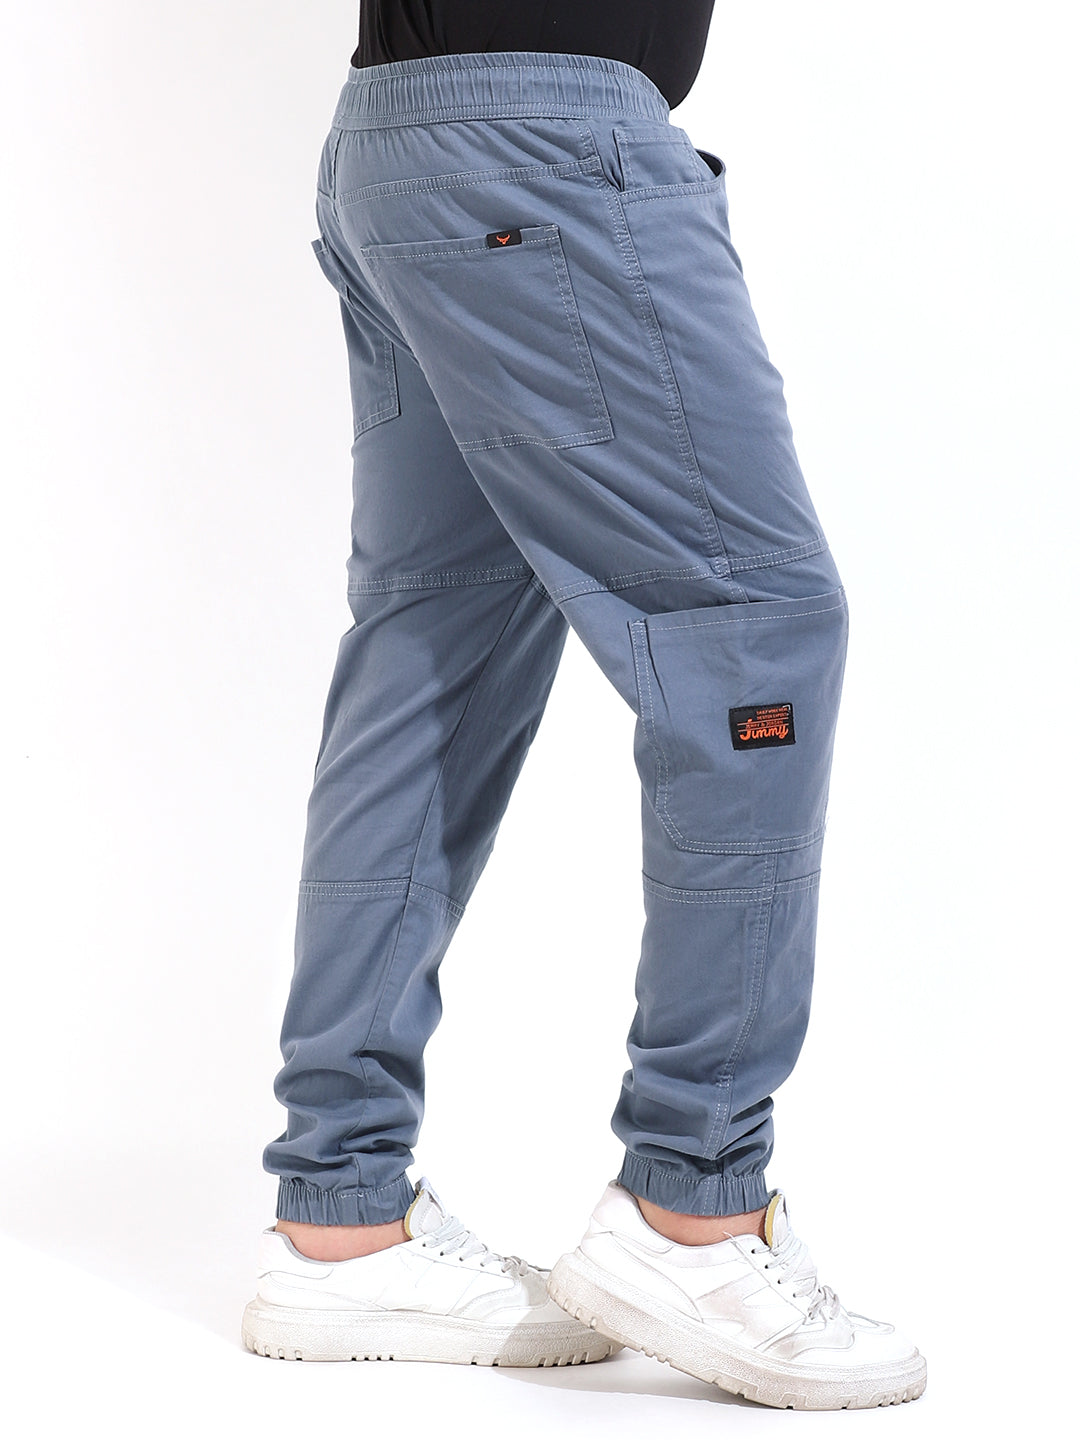 Buy Cargo Pant w Buckle Detail Men's Jeans & Pants from SWITCH. Find SWITCH  fashion & more at DrJays.com